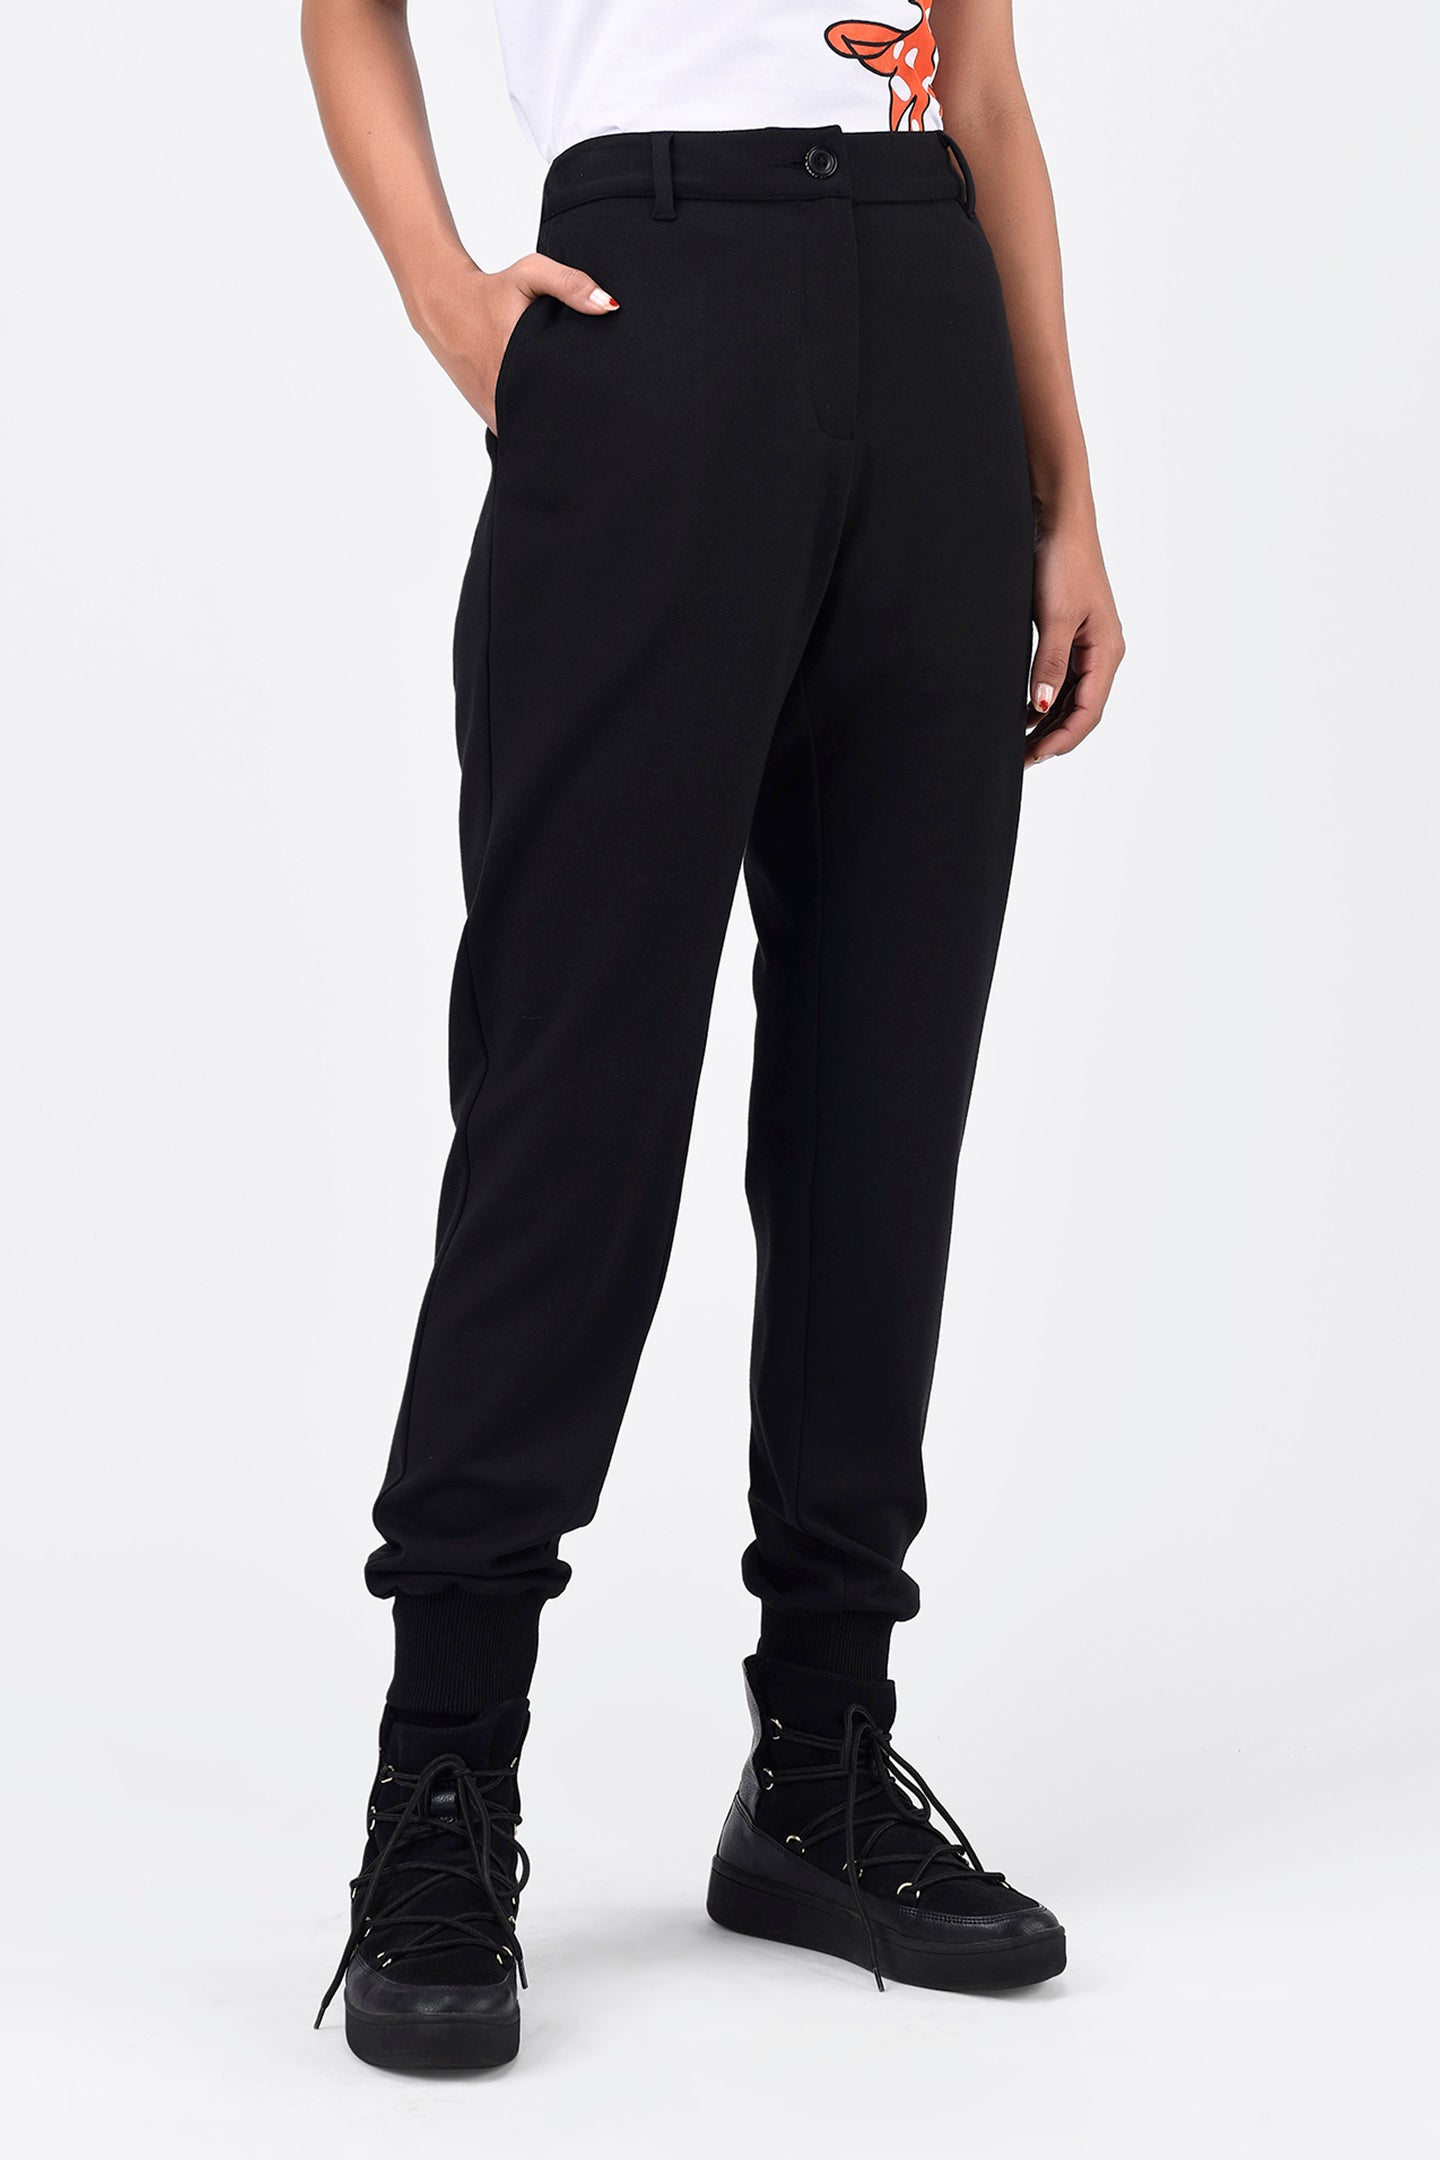 Typography Womens Jogger